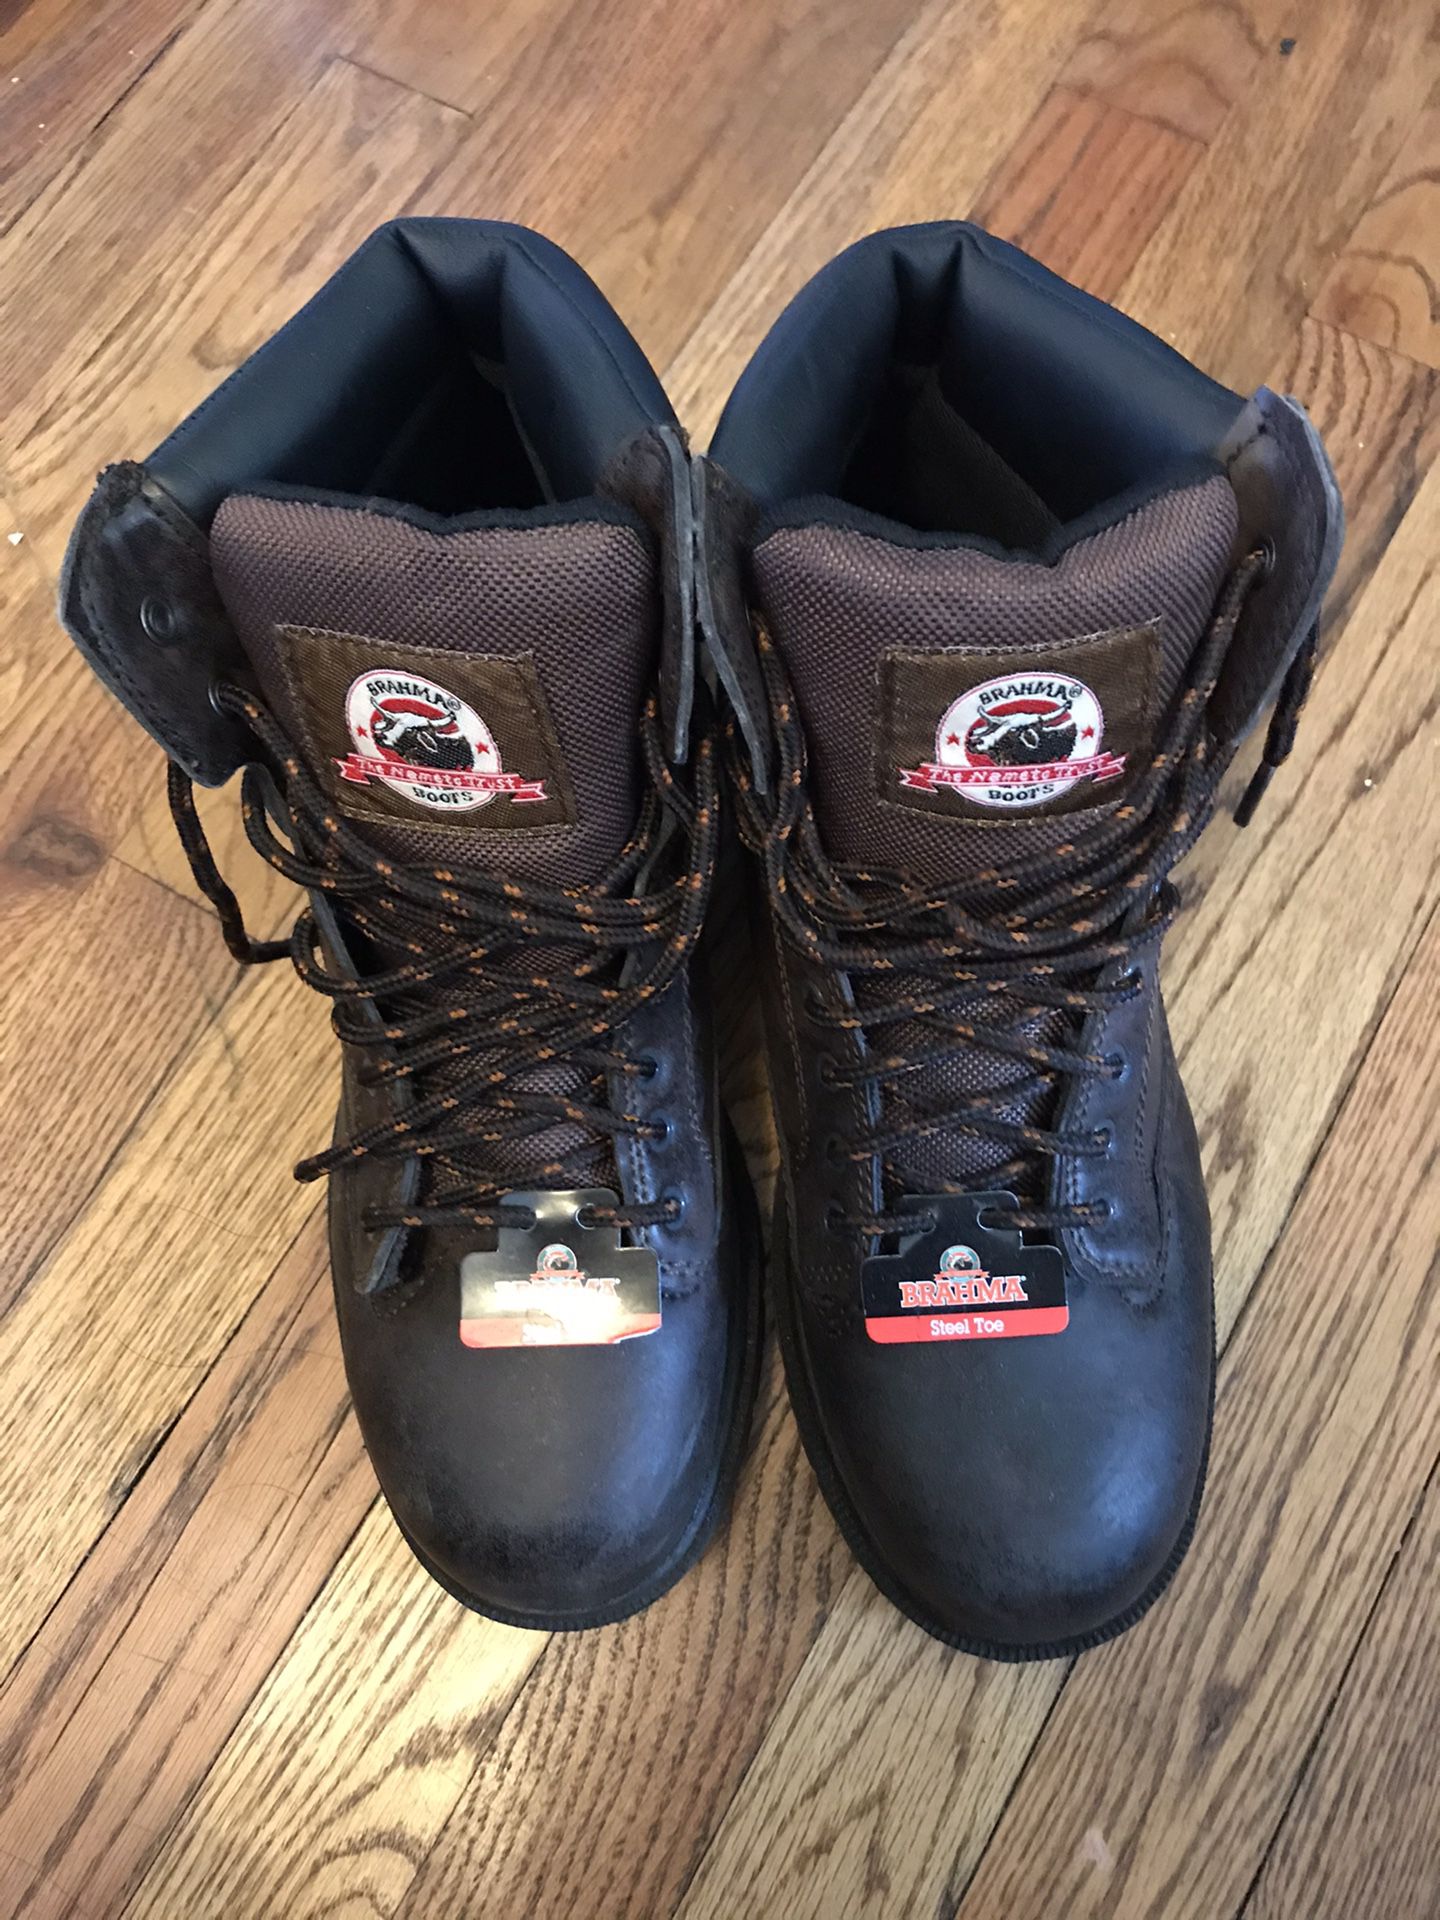 Men’s working boots, size 9